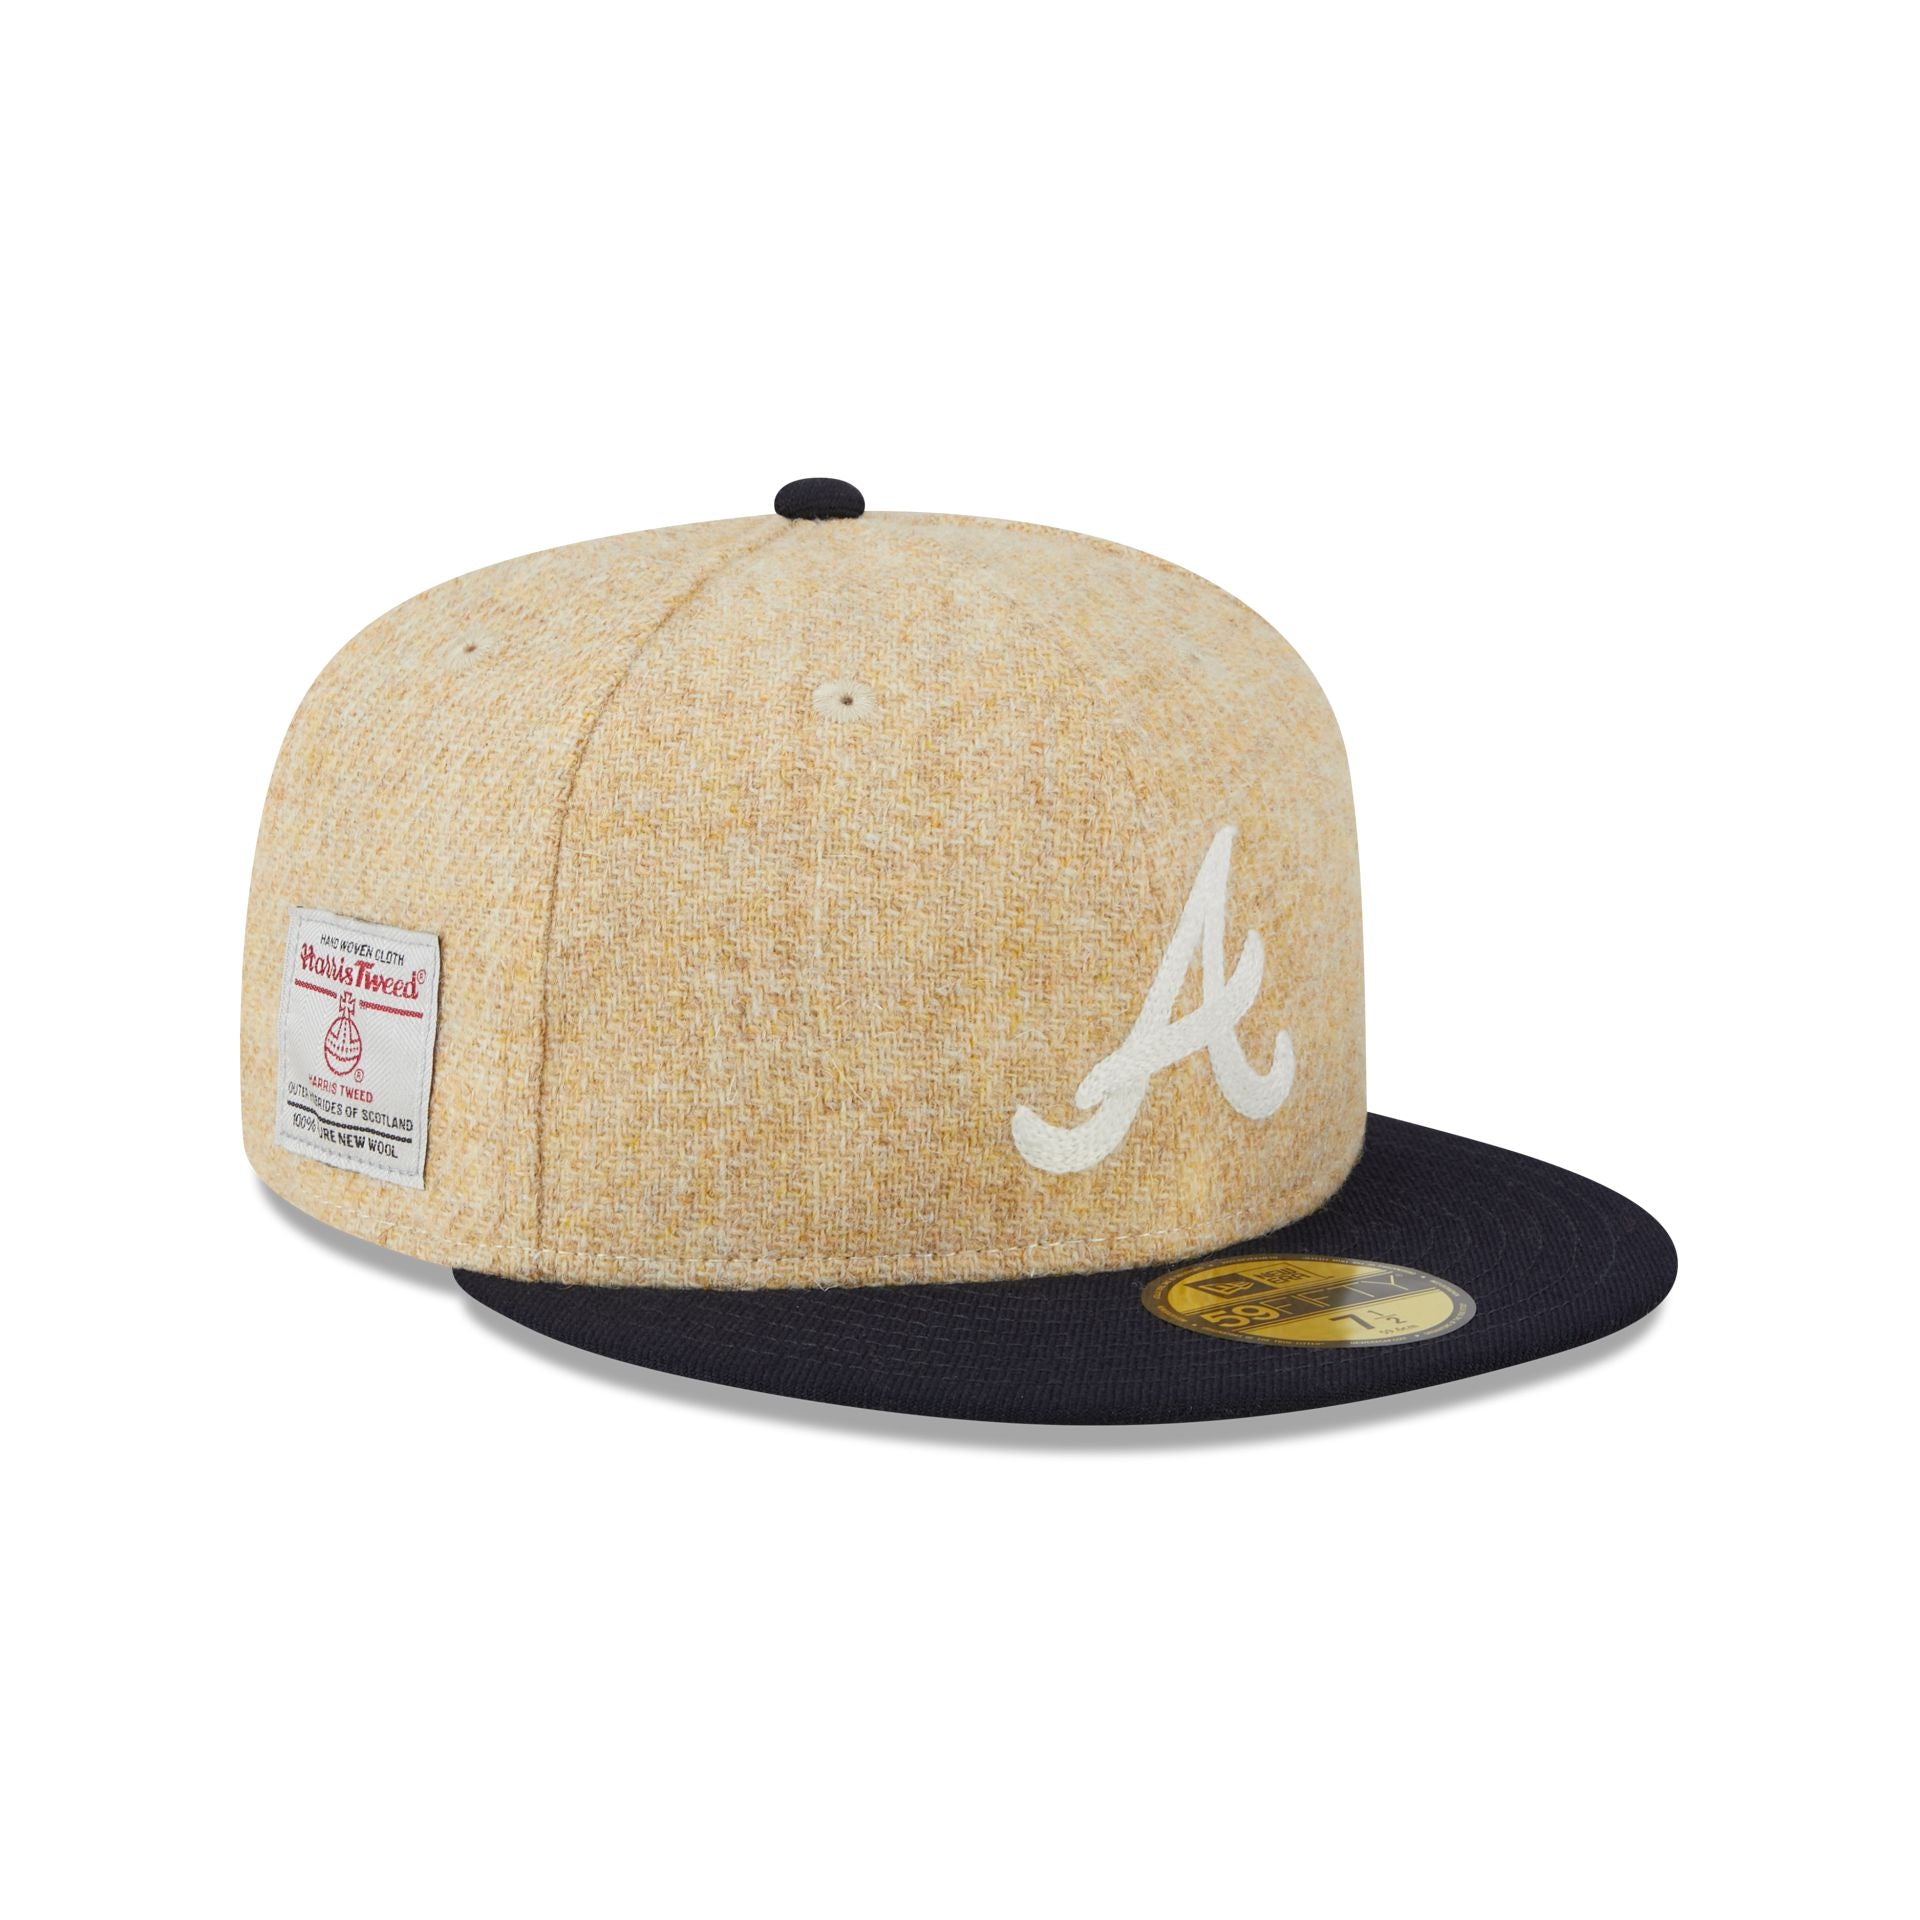 Buy New Era Atlanta Braves Camel Fitted Hat at In Style – InStyle